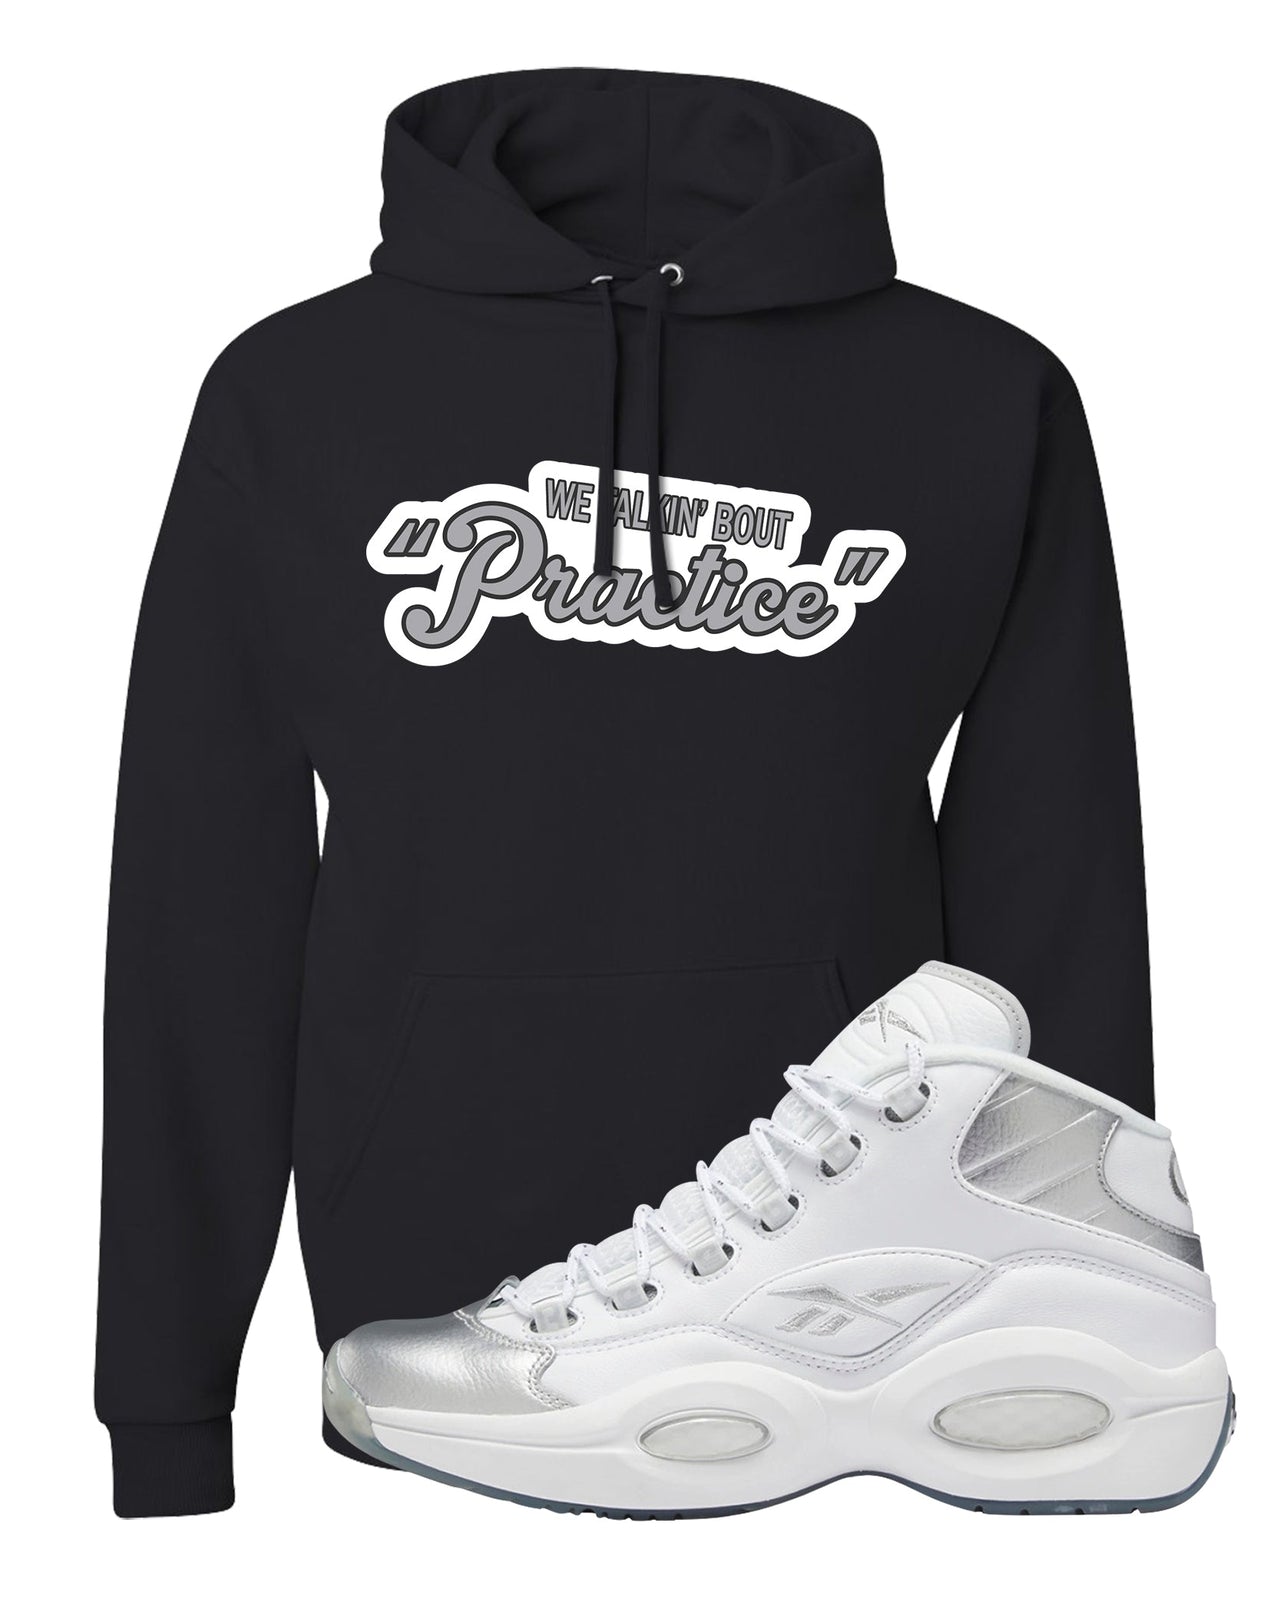 25th Anniversary Mid Questions Hoodie | Talkin' Bout Practice, Black